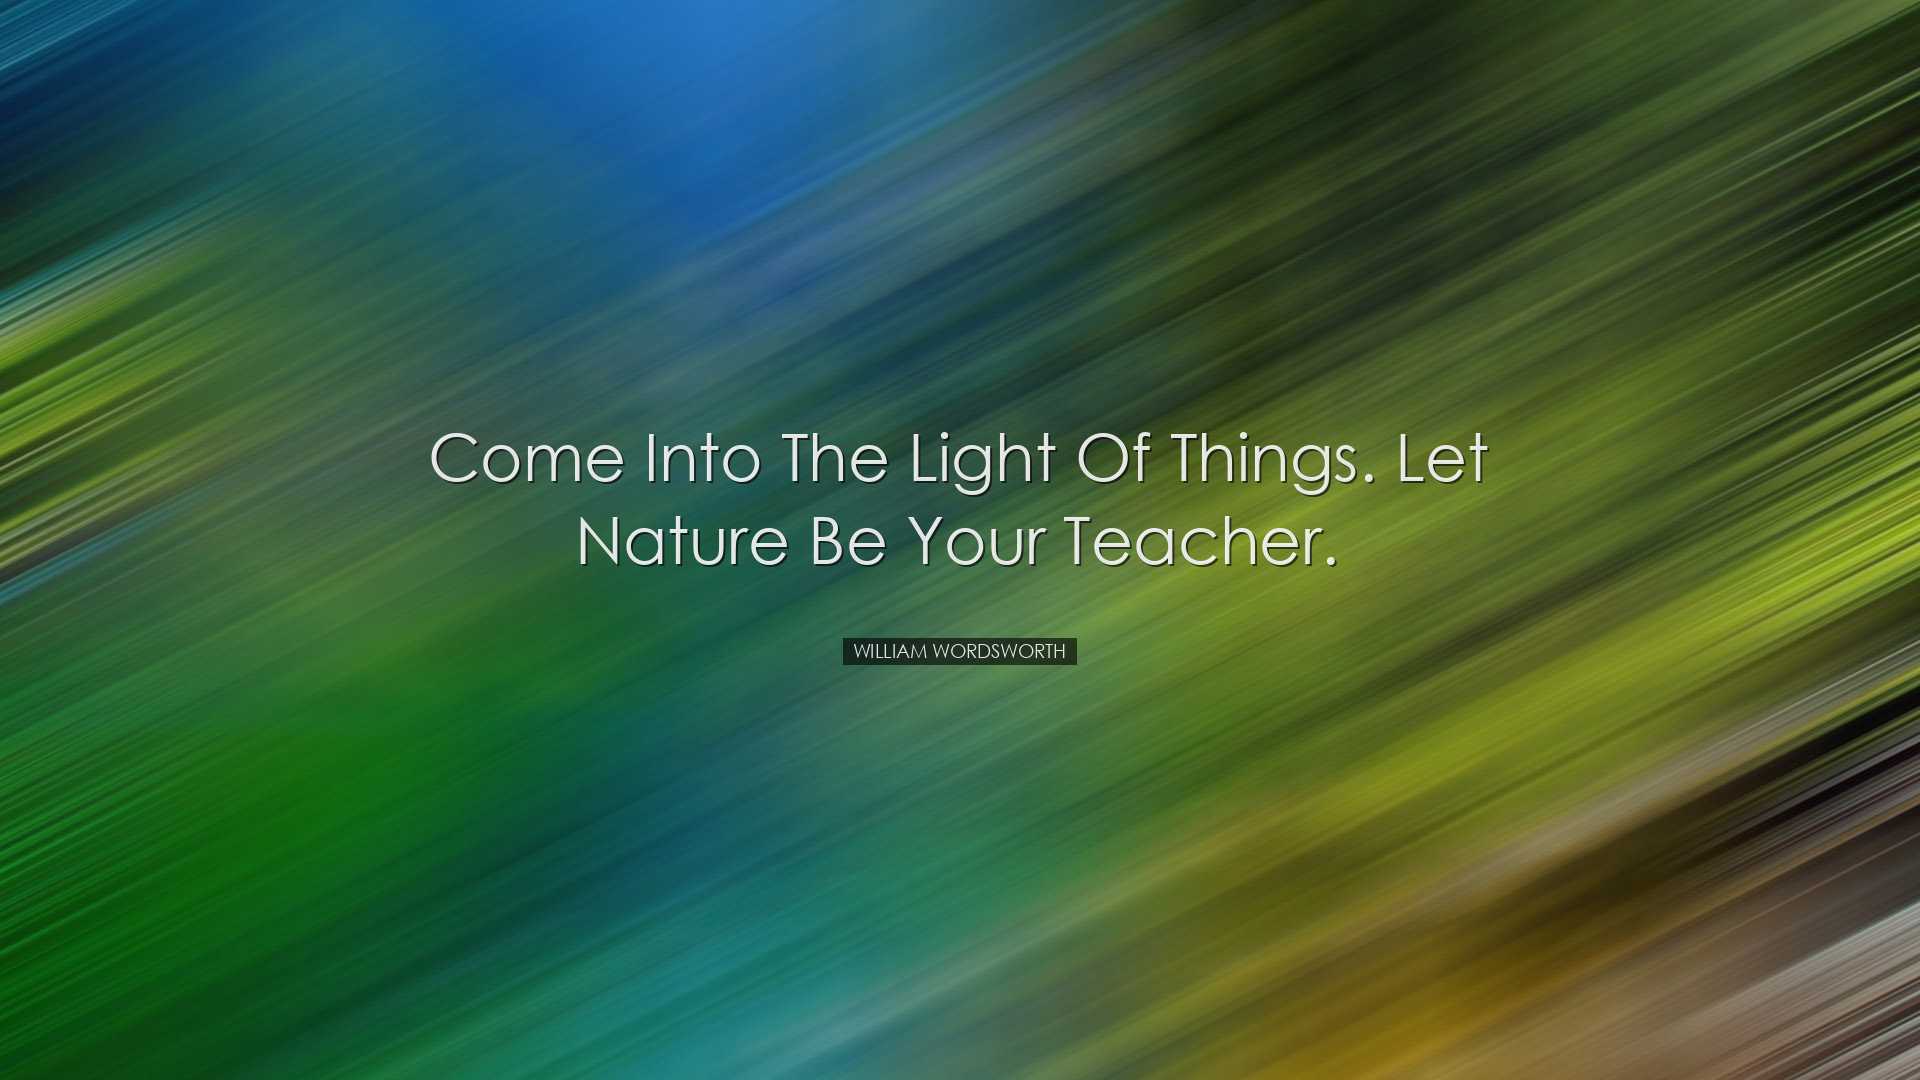 Come into the light of things. Let nature be your teacher. - Willi